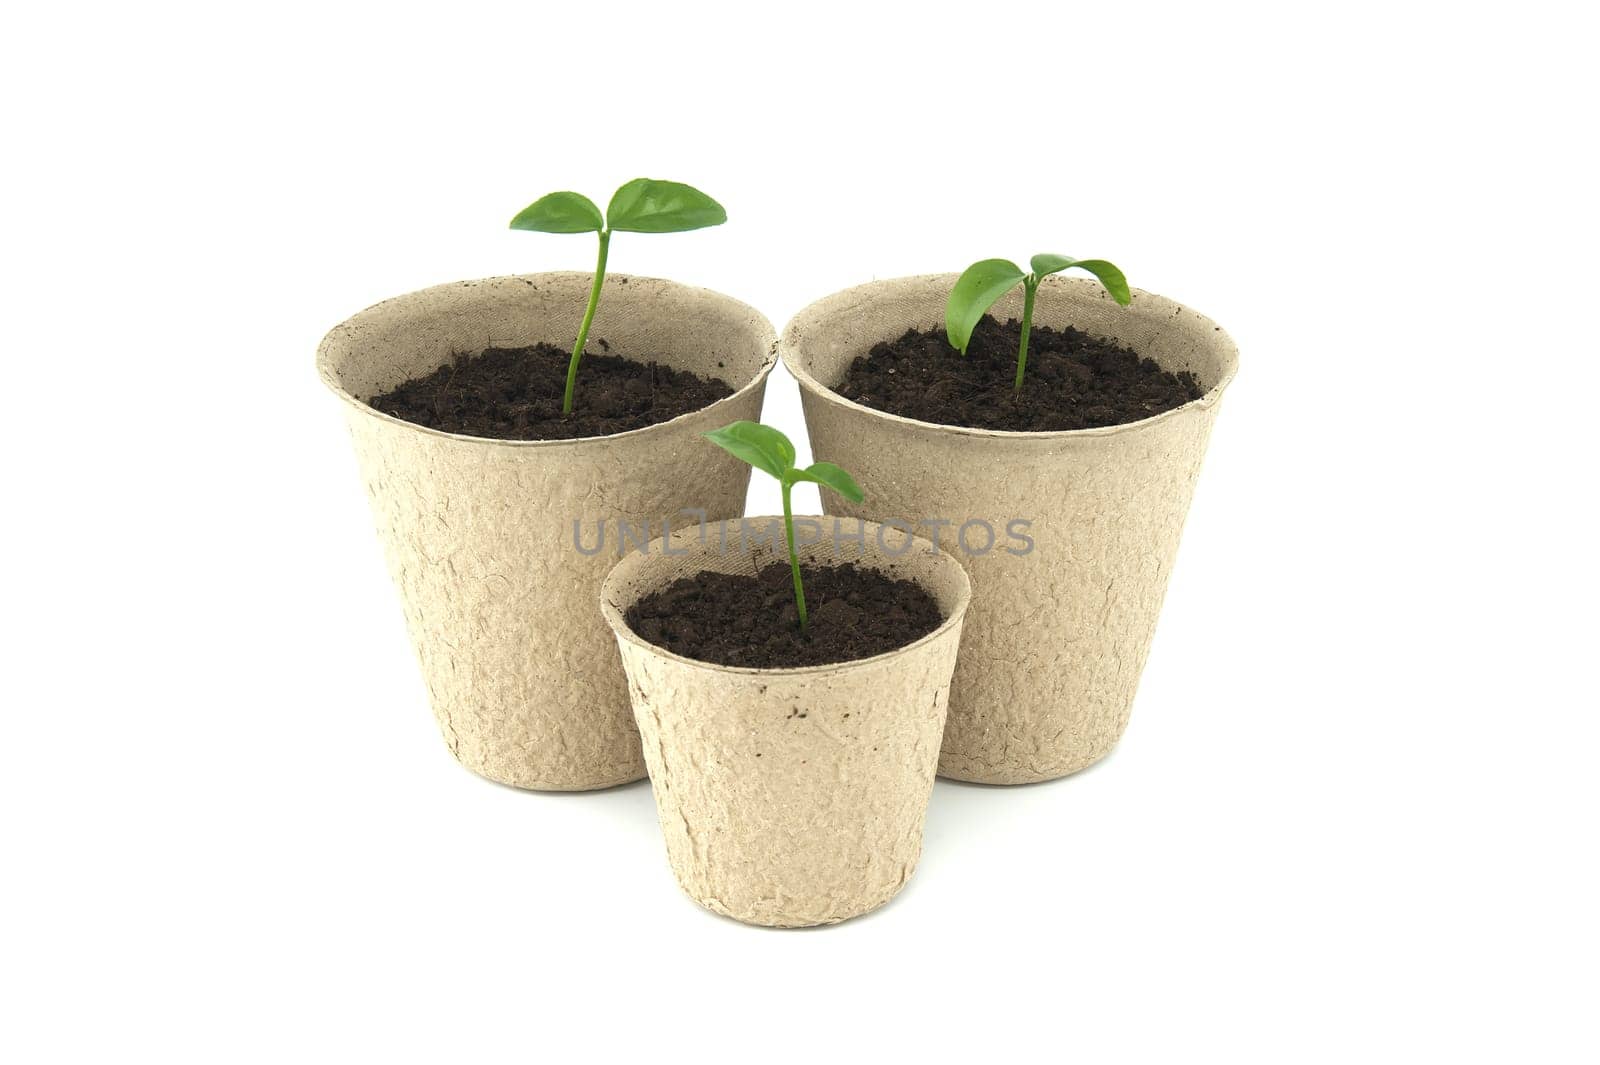 Small green seedlings sprouting from dark brown soil contained within a round, light brown biodegradable pots, isolated on white background